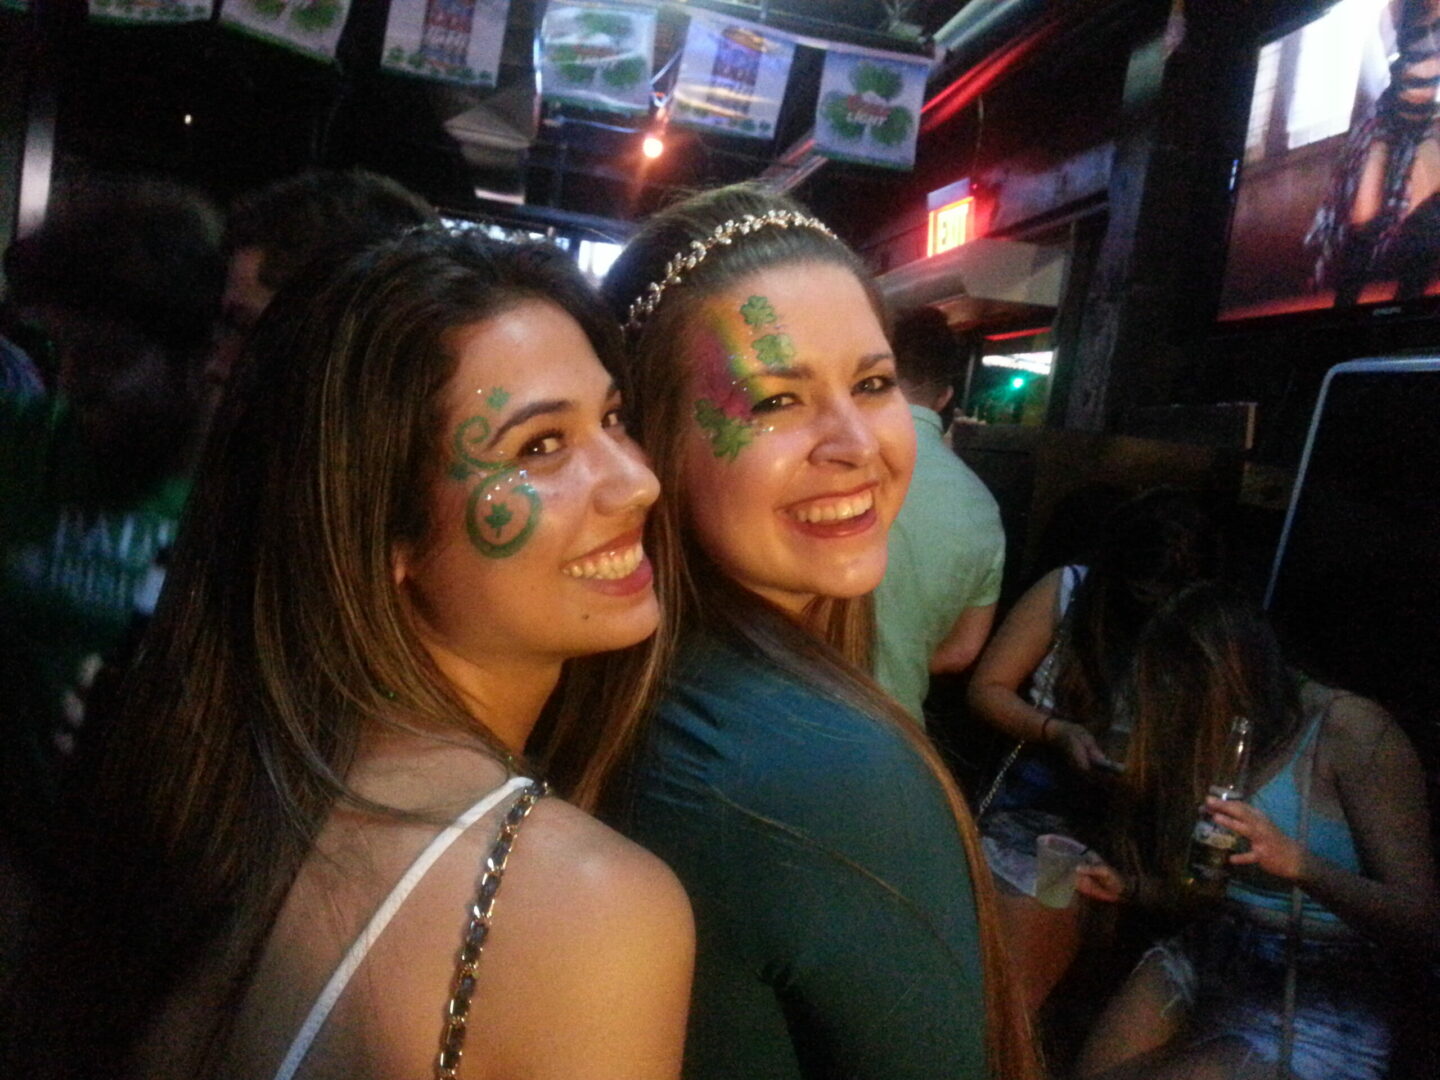 Women With Face Paint at a Party